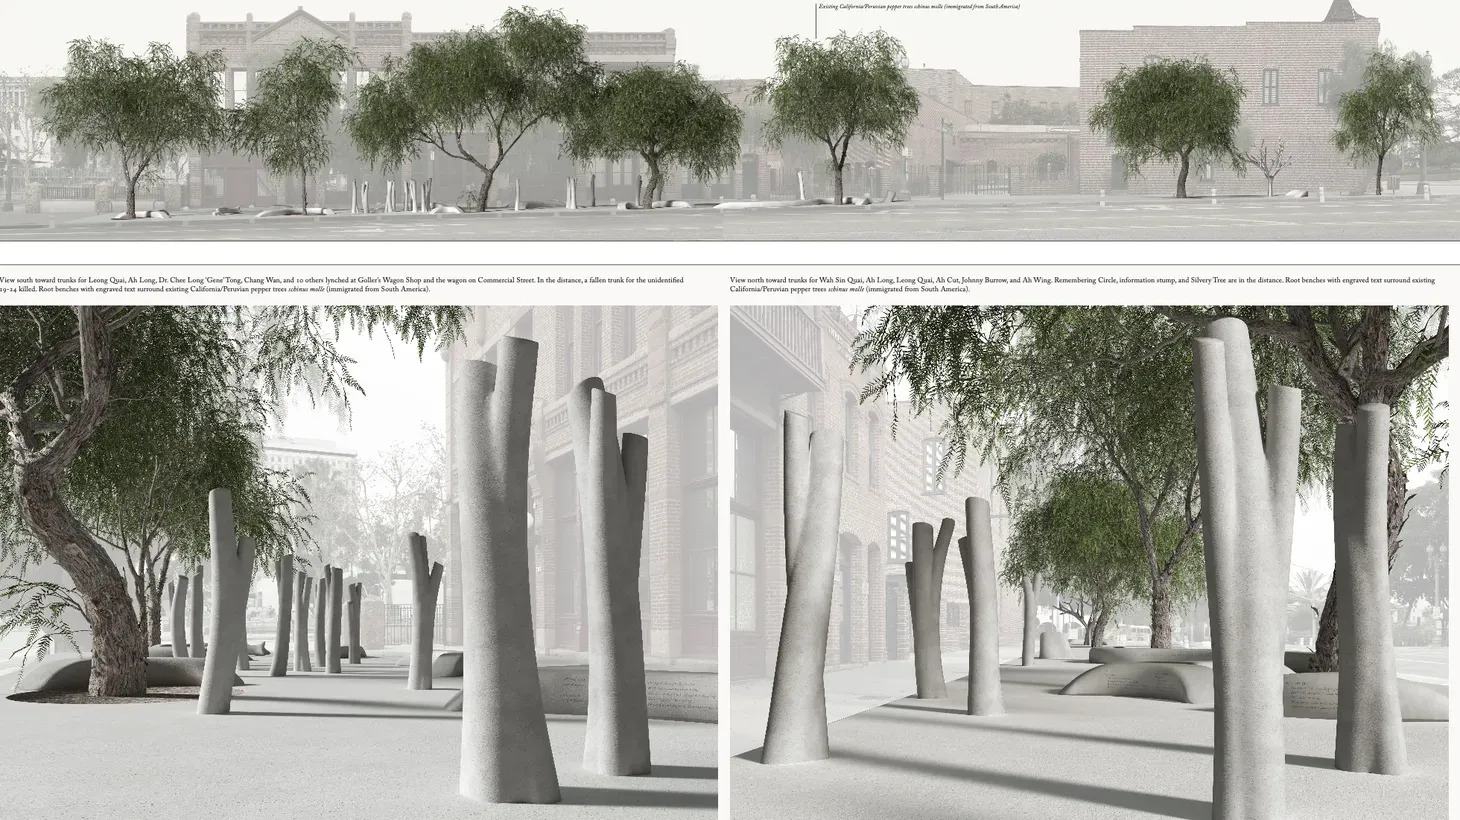 Artists Sze Tsung Nicolás Leong and Judy Chui-Hua Chung won a competition to design a memorial to victims of the 1871 anti-Chinese massacre in downtown Los Angeles. Their design is inspired by the banyan trees native to the region in China, where many 19th century Chinese Angelenos were born.